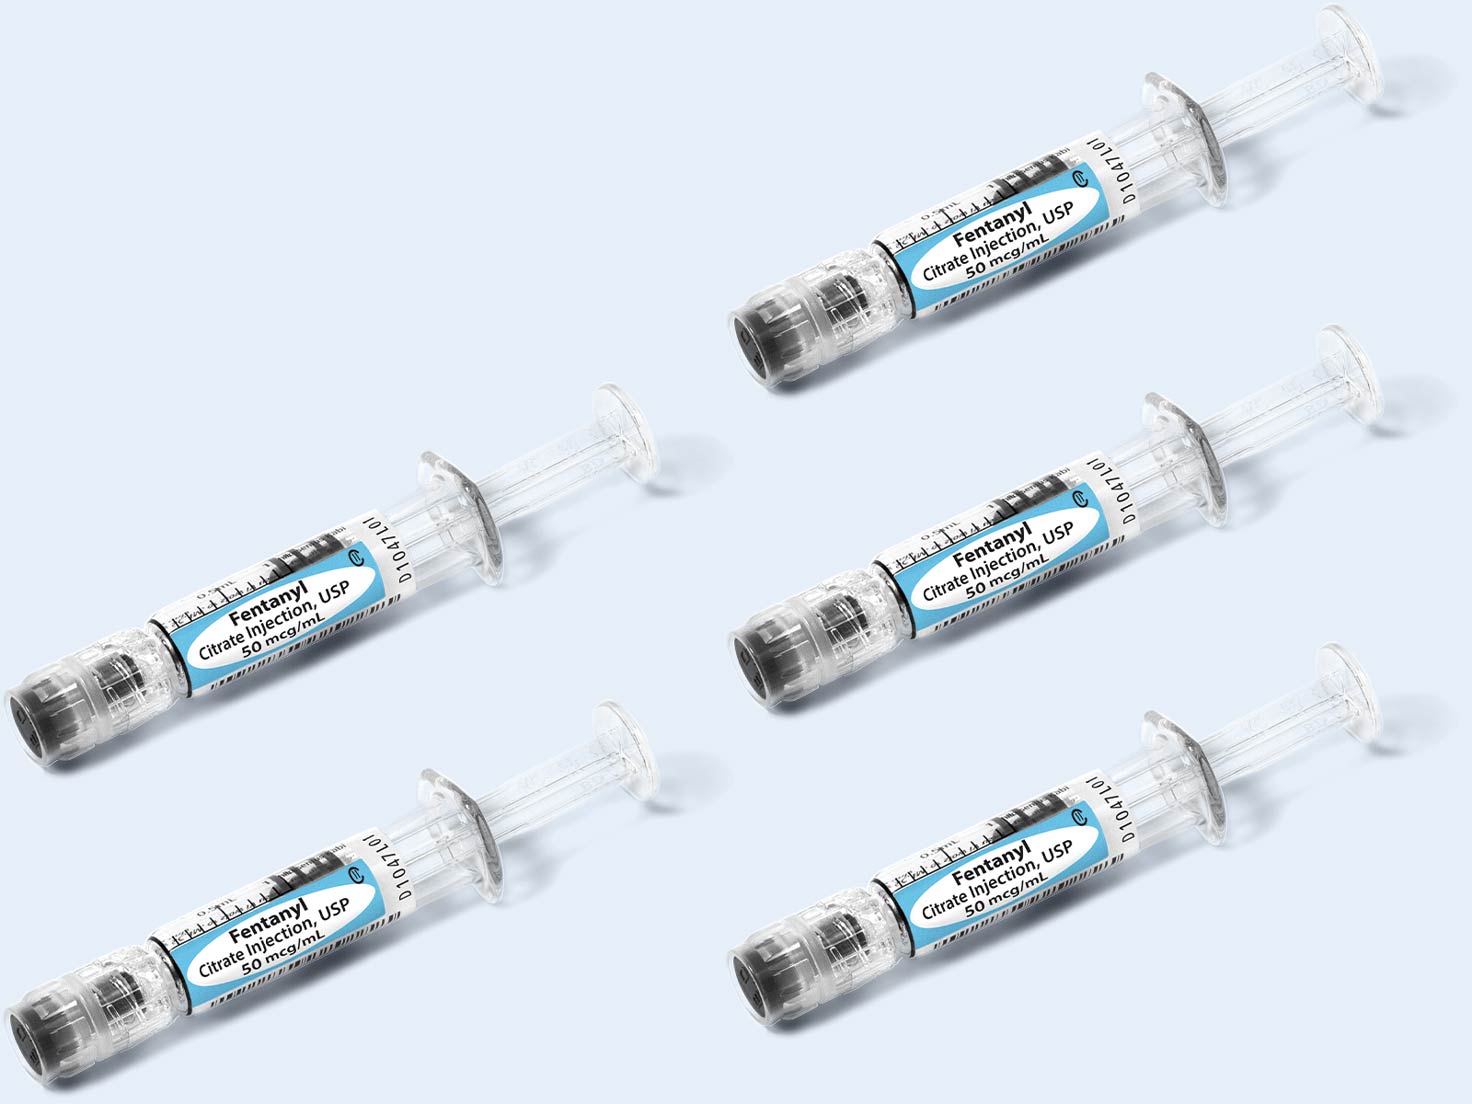 Five syringes on a blue field